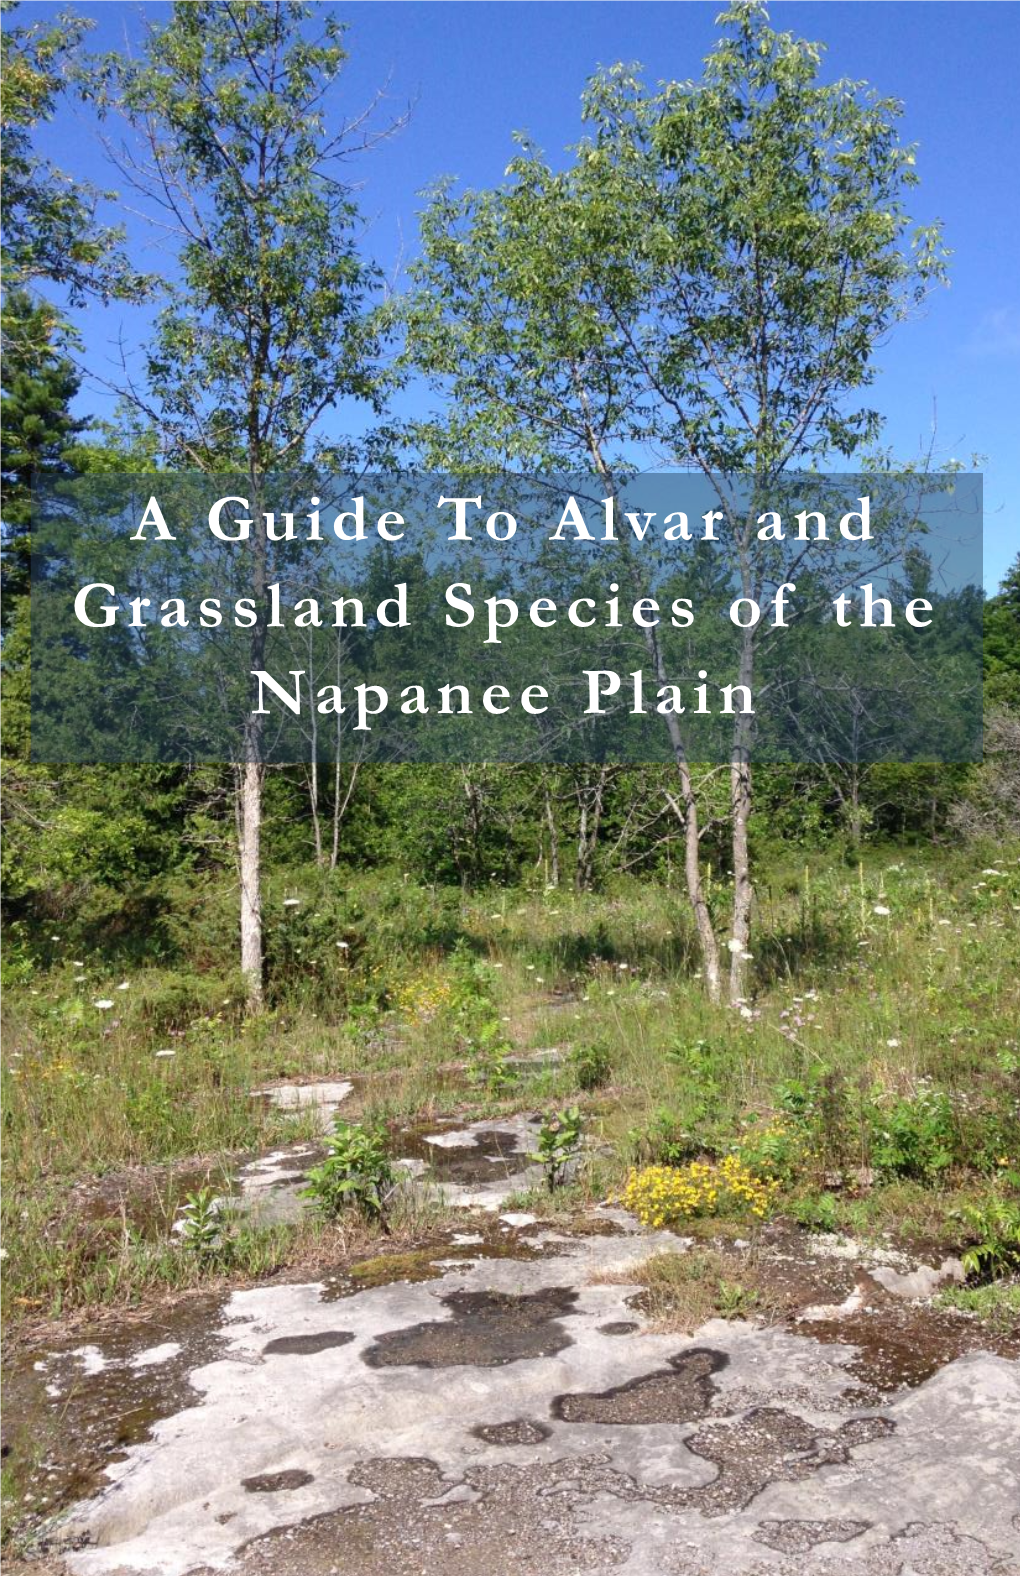 A Guide to Alvar and Grassland Species of the Napanee Plain